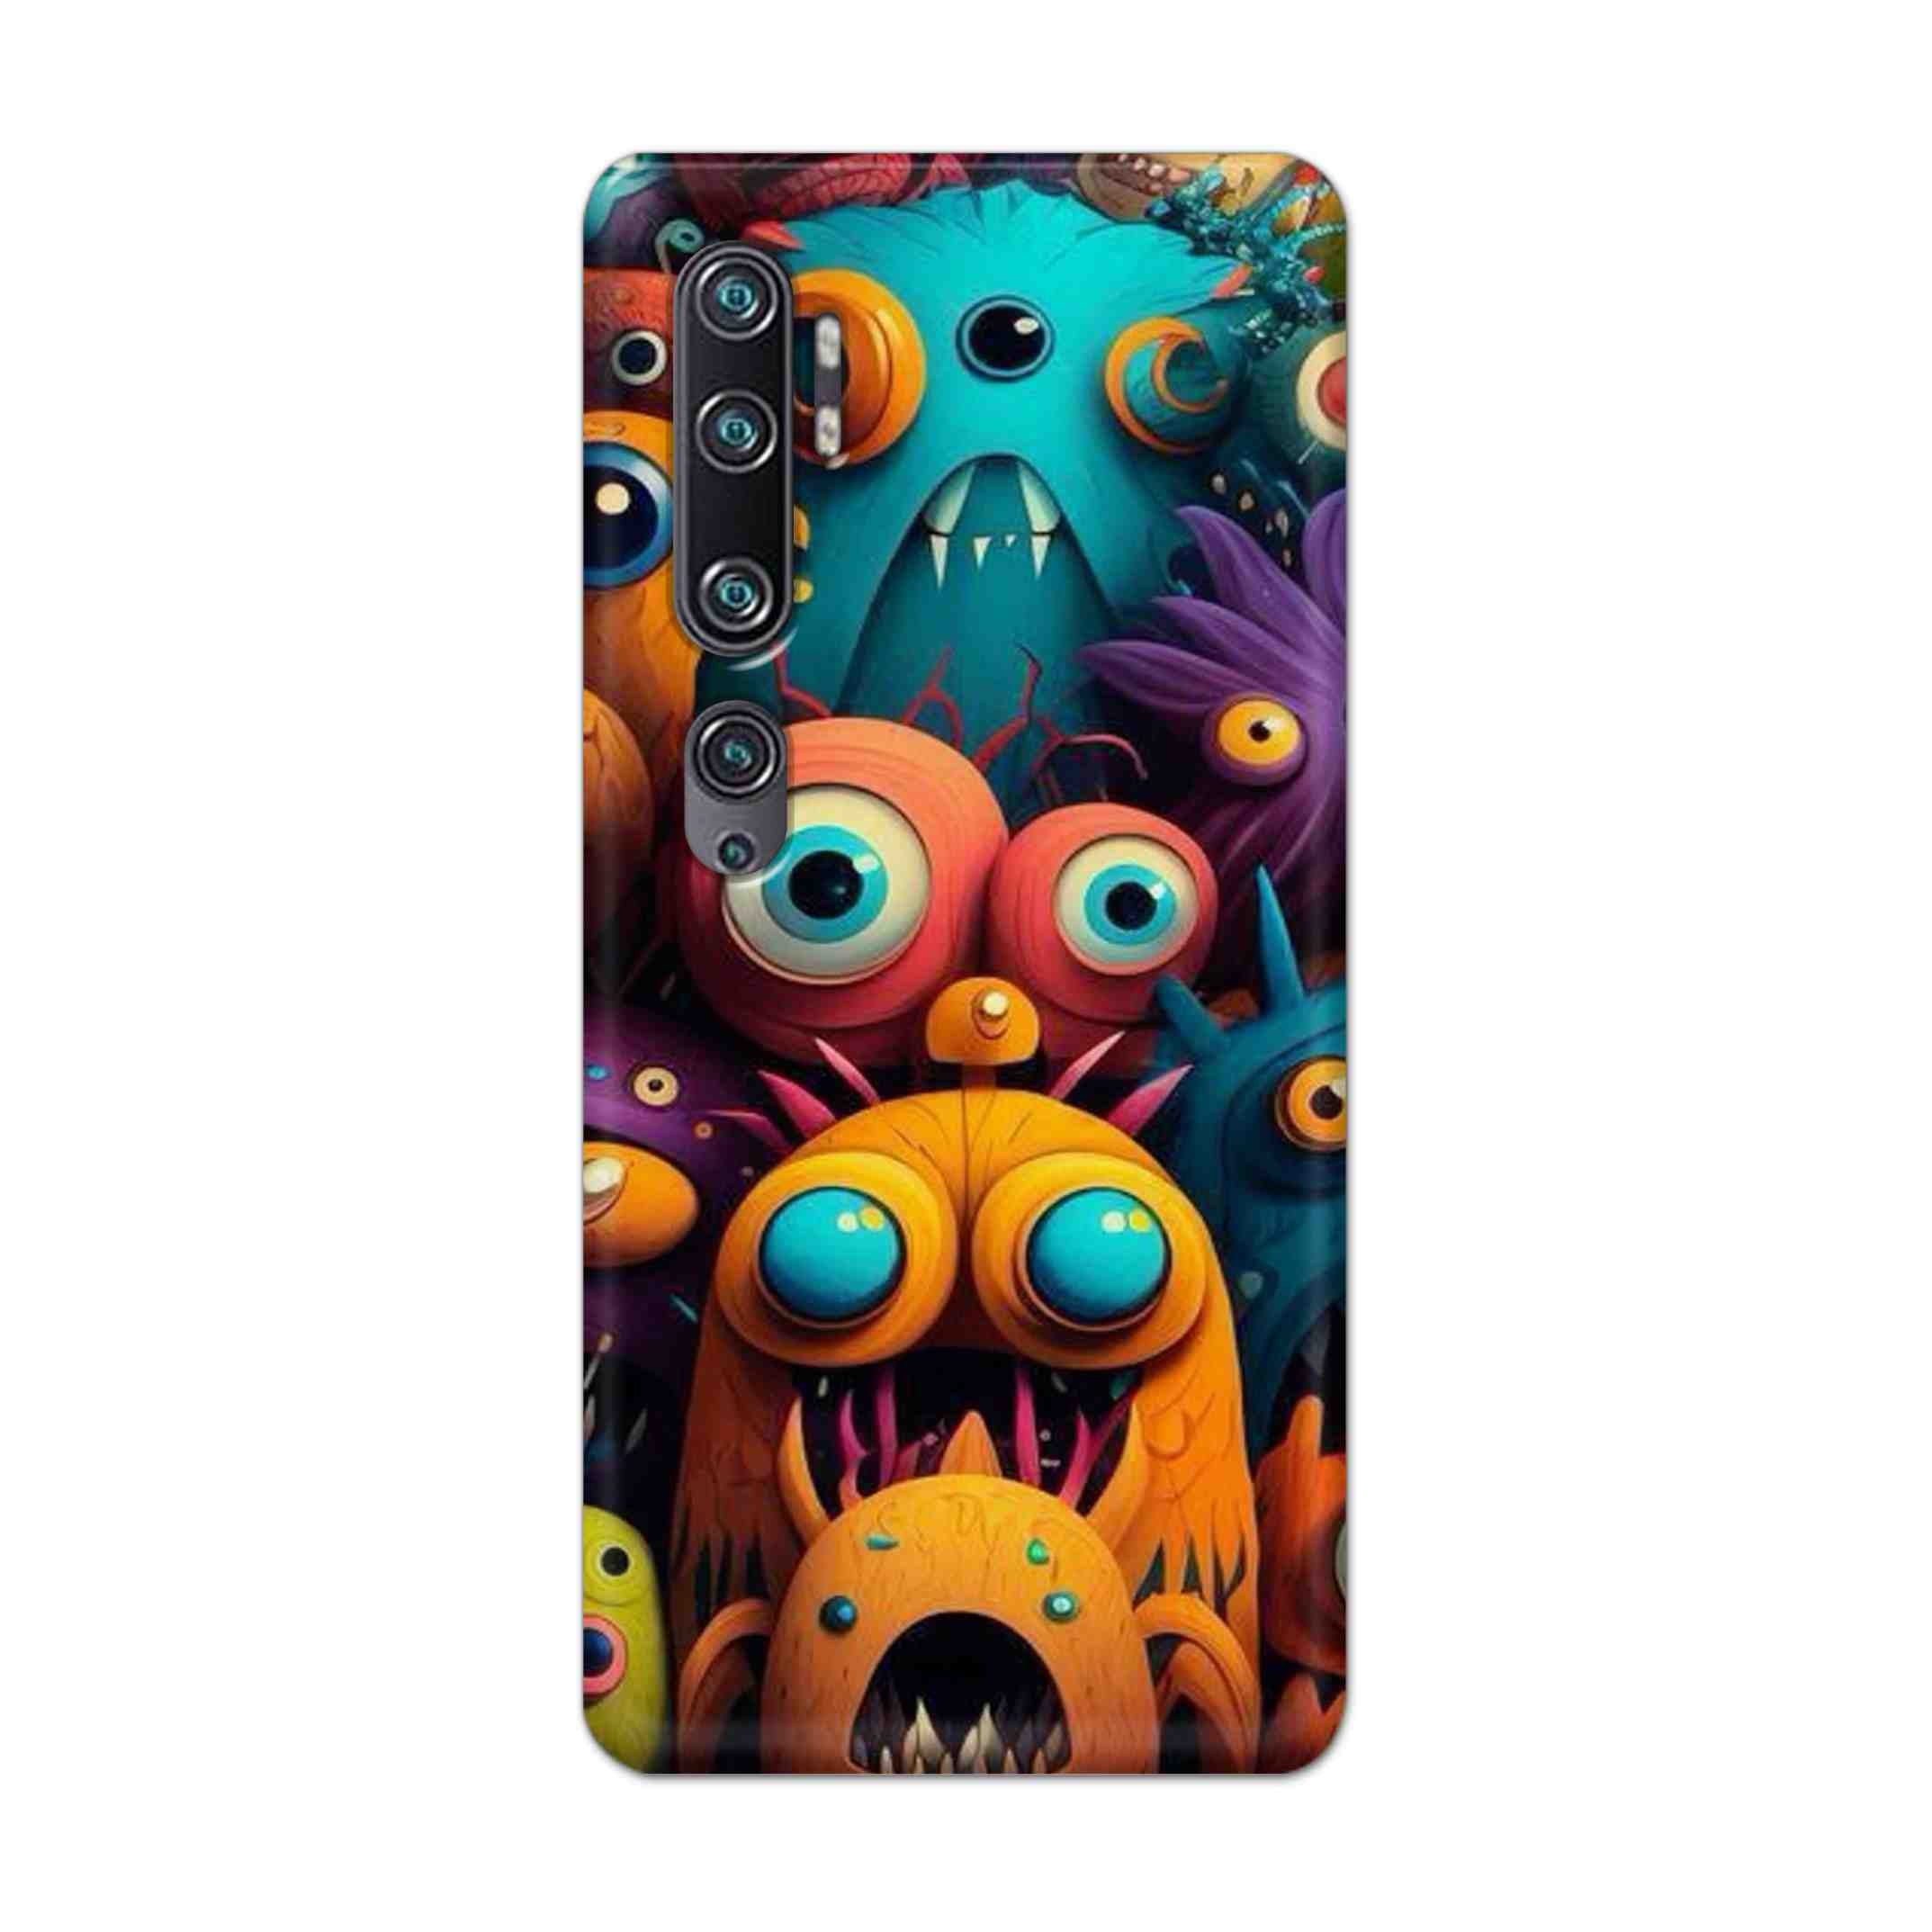 Buy Zombie Hard Back Mobile Phone Case Cover For Xiaomi Mi Note 10 Online